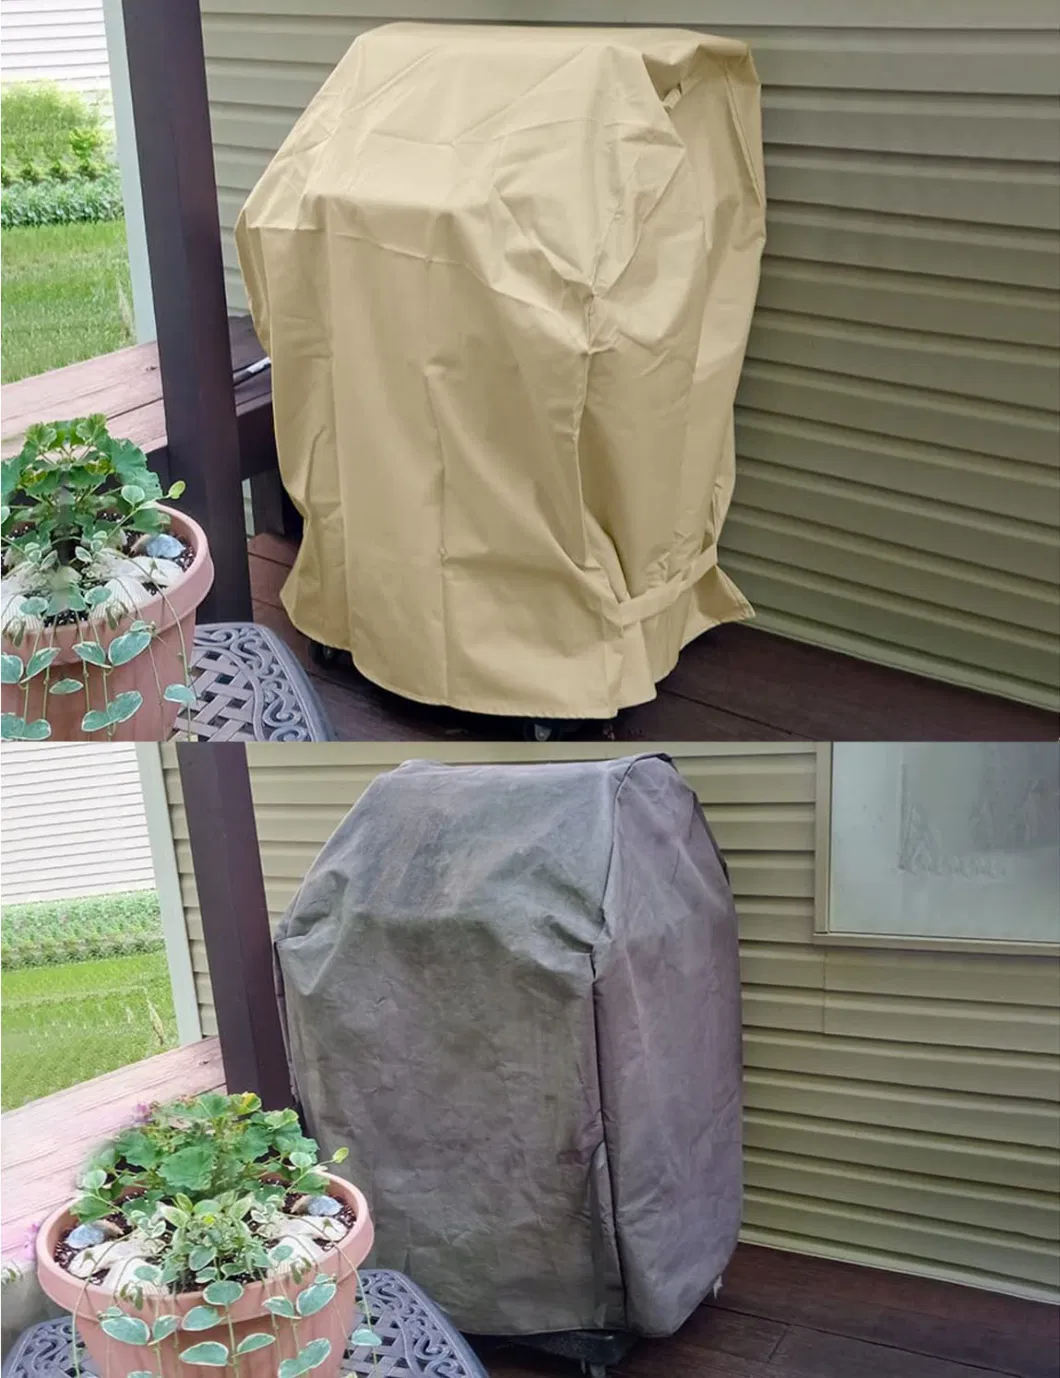 Outdoor Heavy-Duty Waterproof Small Gas Barbecue Stove Cover, UV Resistant Folding Edge Table Barbecue Stove Cover,